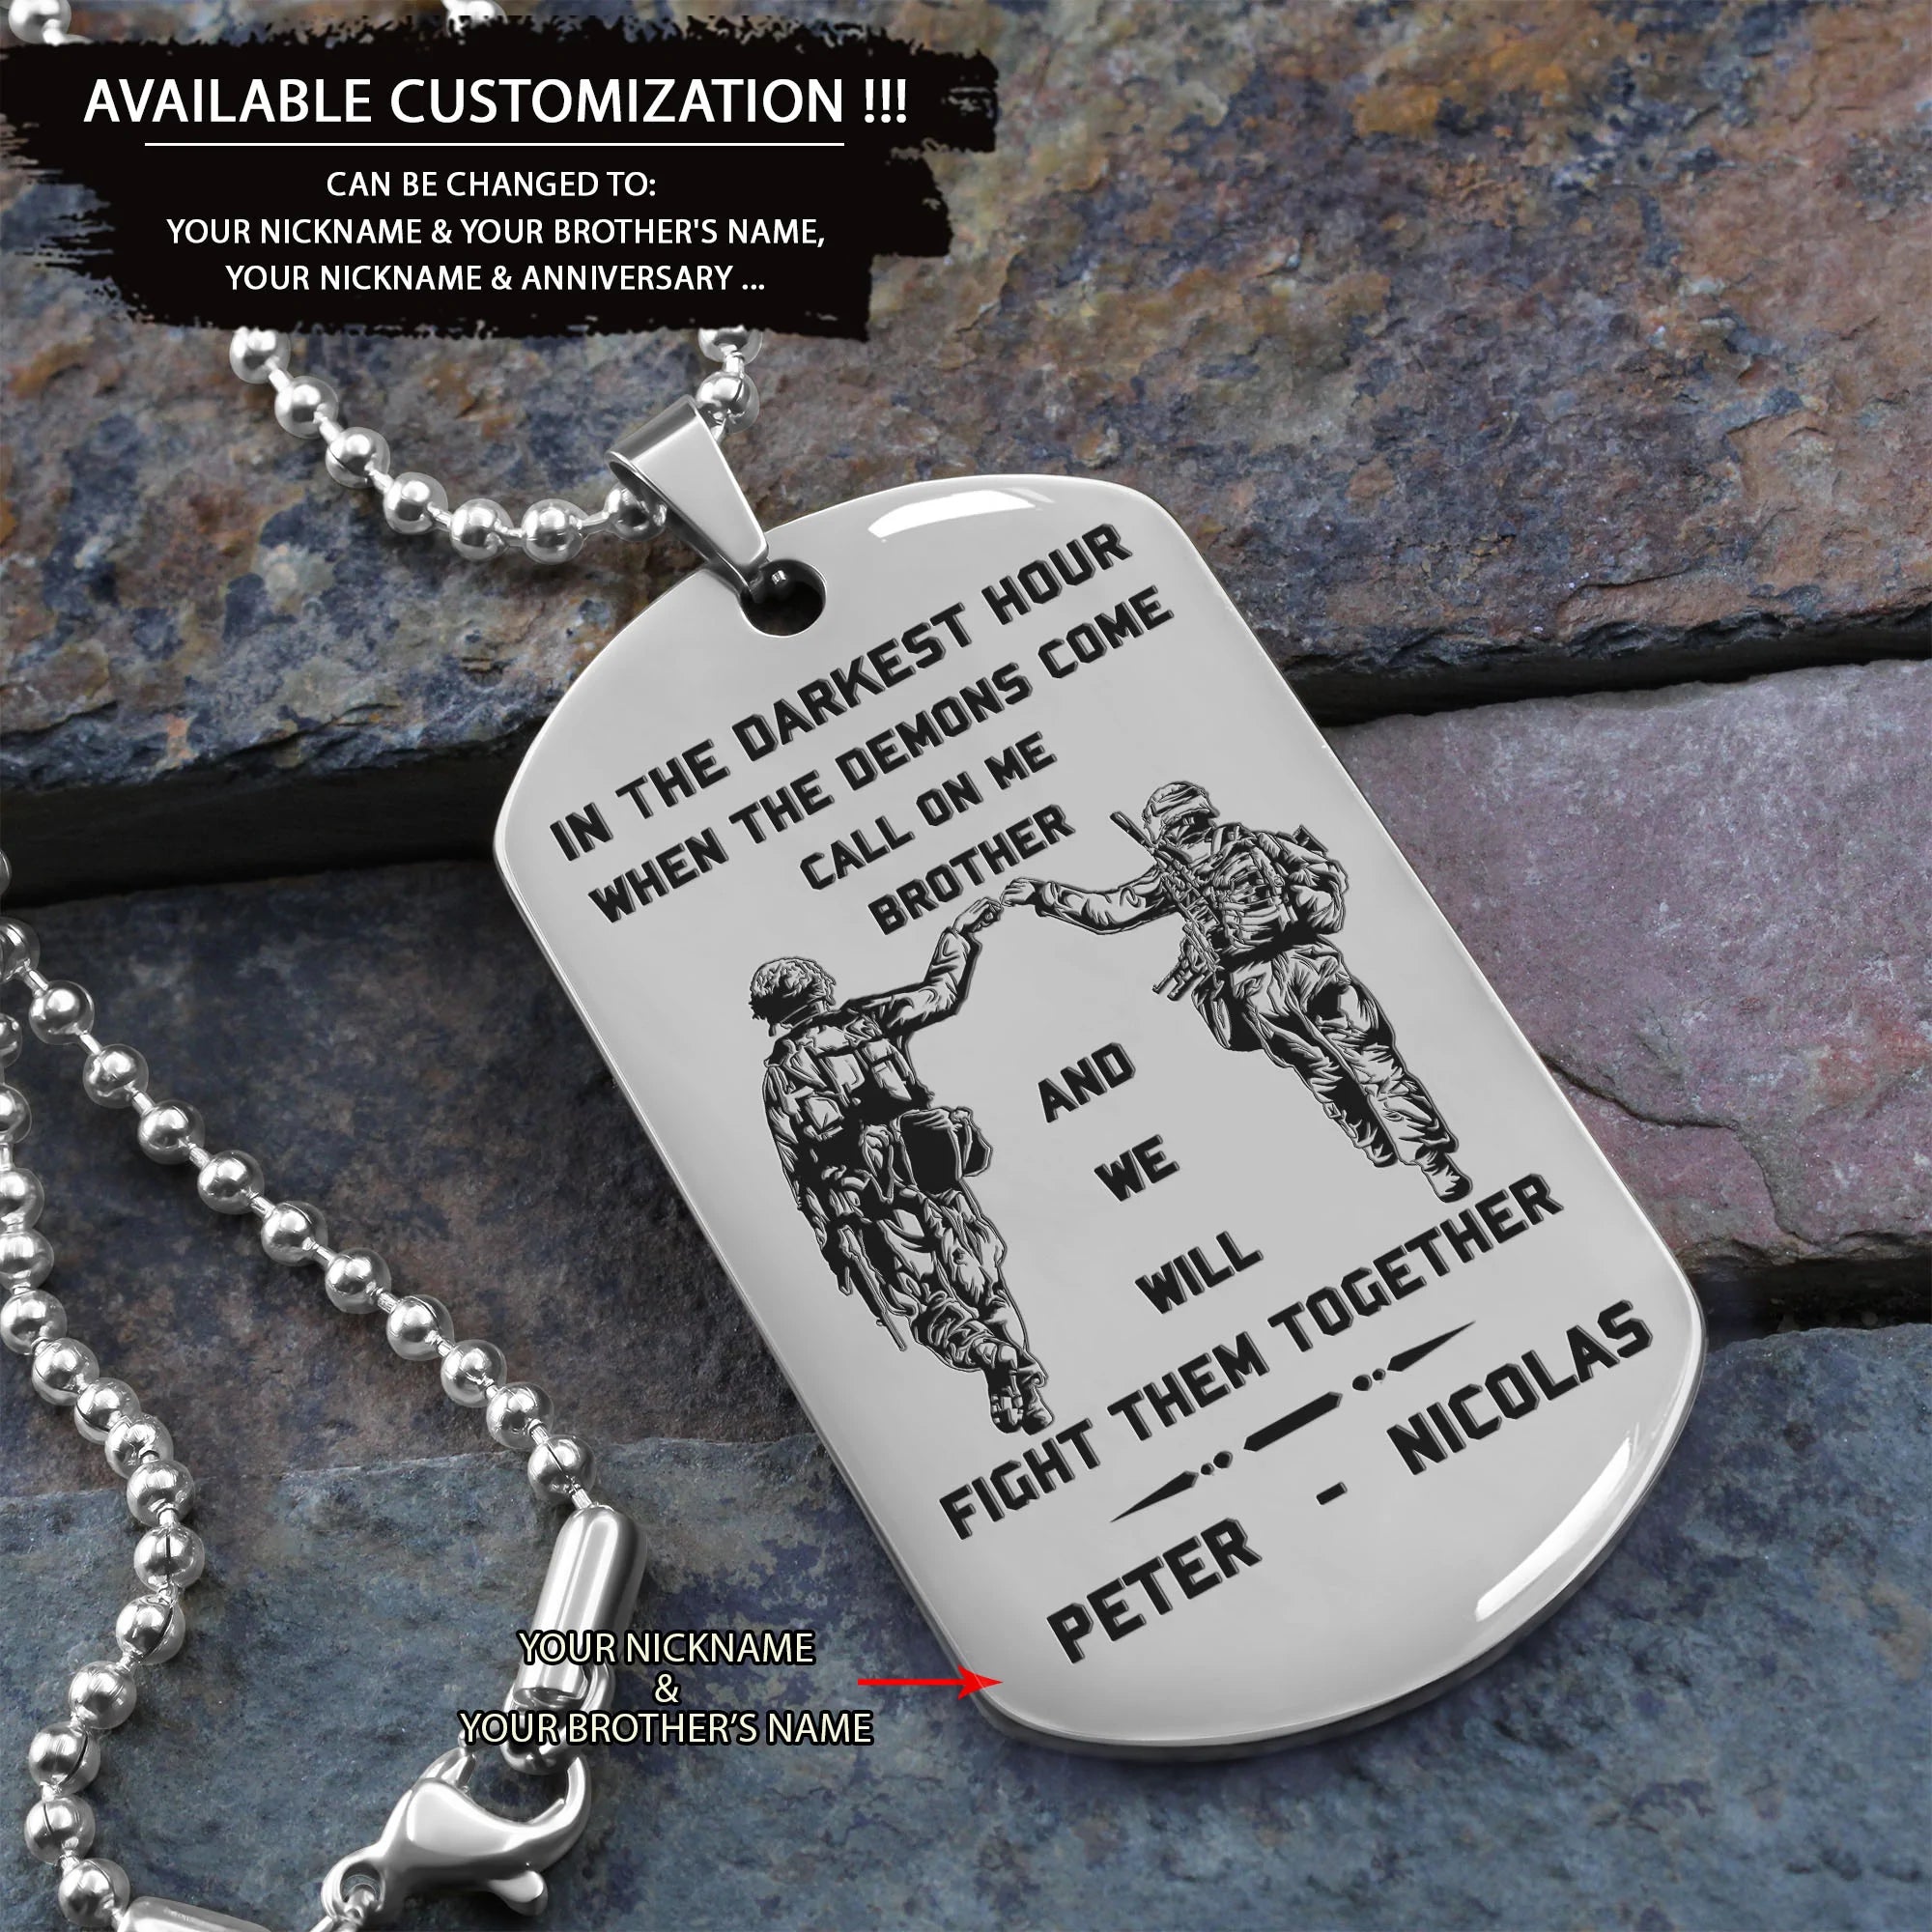 Customizable engraved brother dog tag gift from brother, In the darkest hour, When the demons come call on me brother and we will fight them together